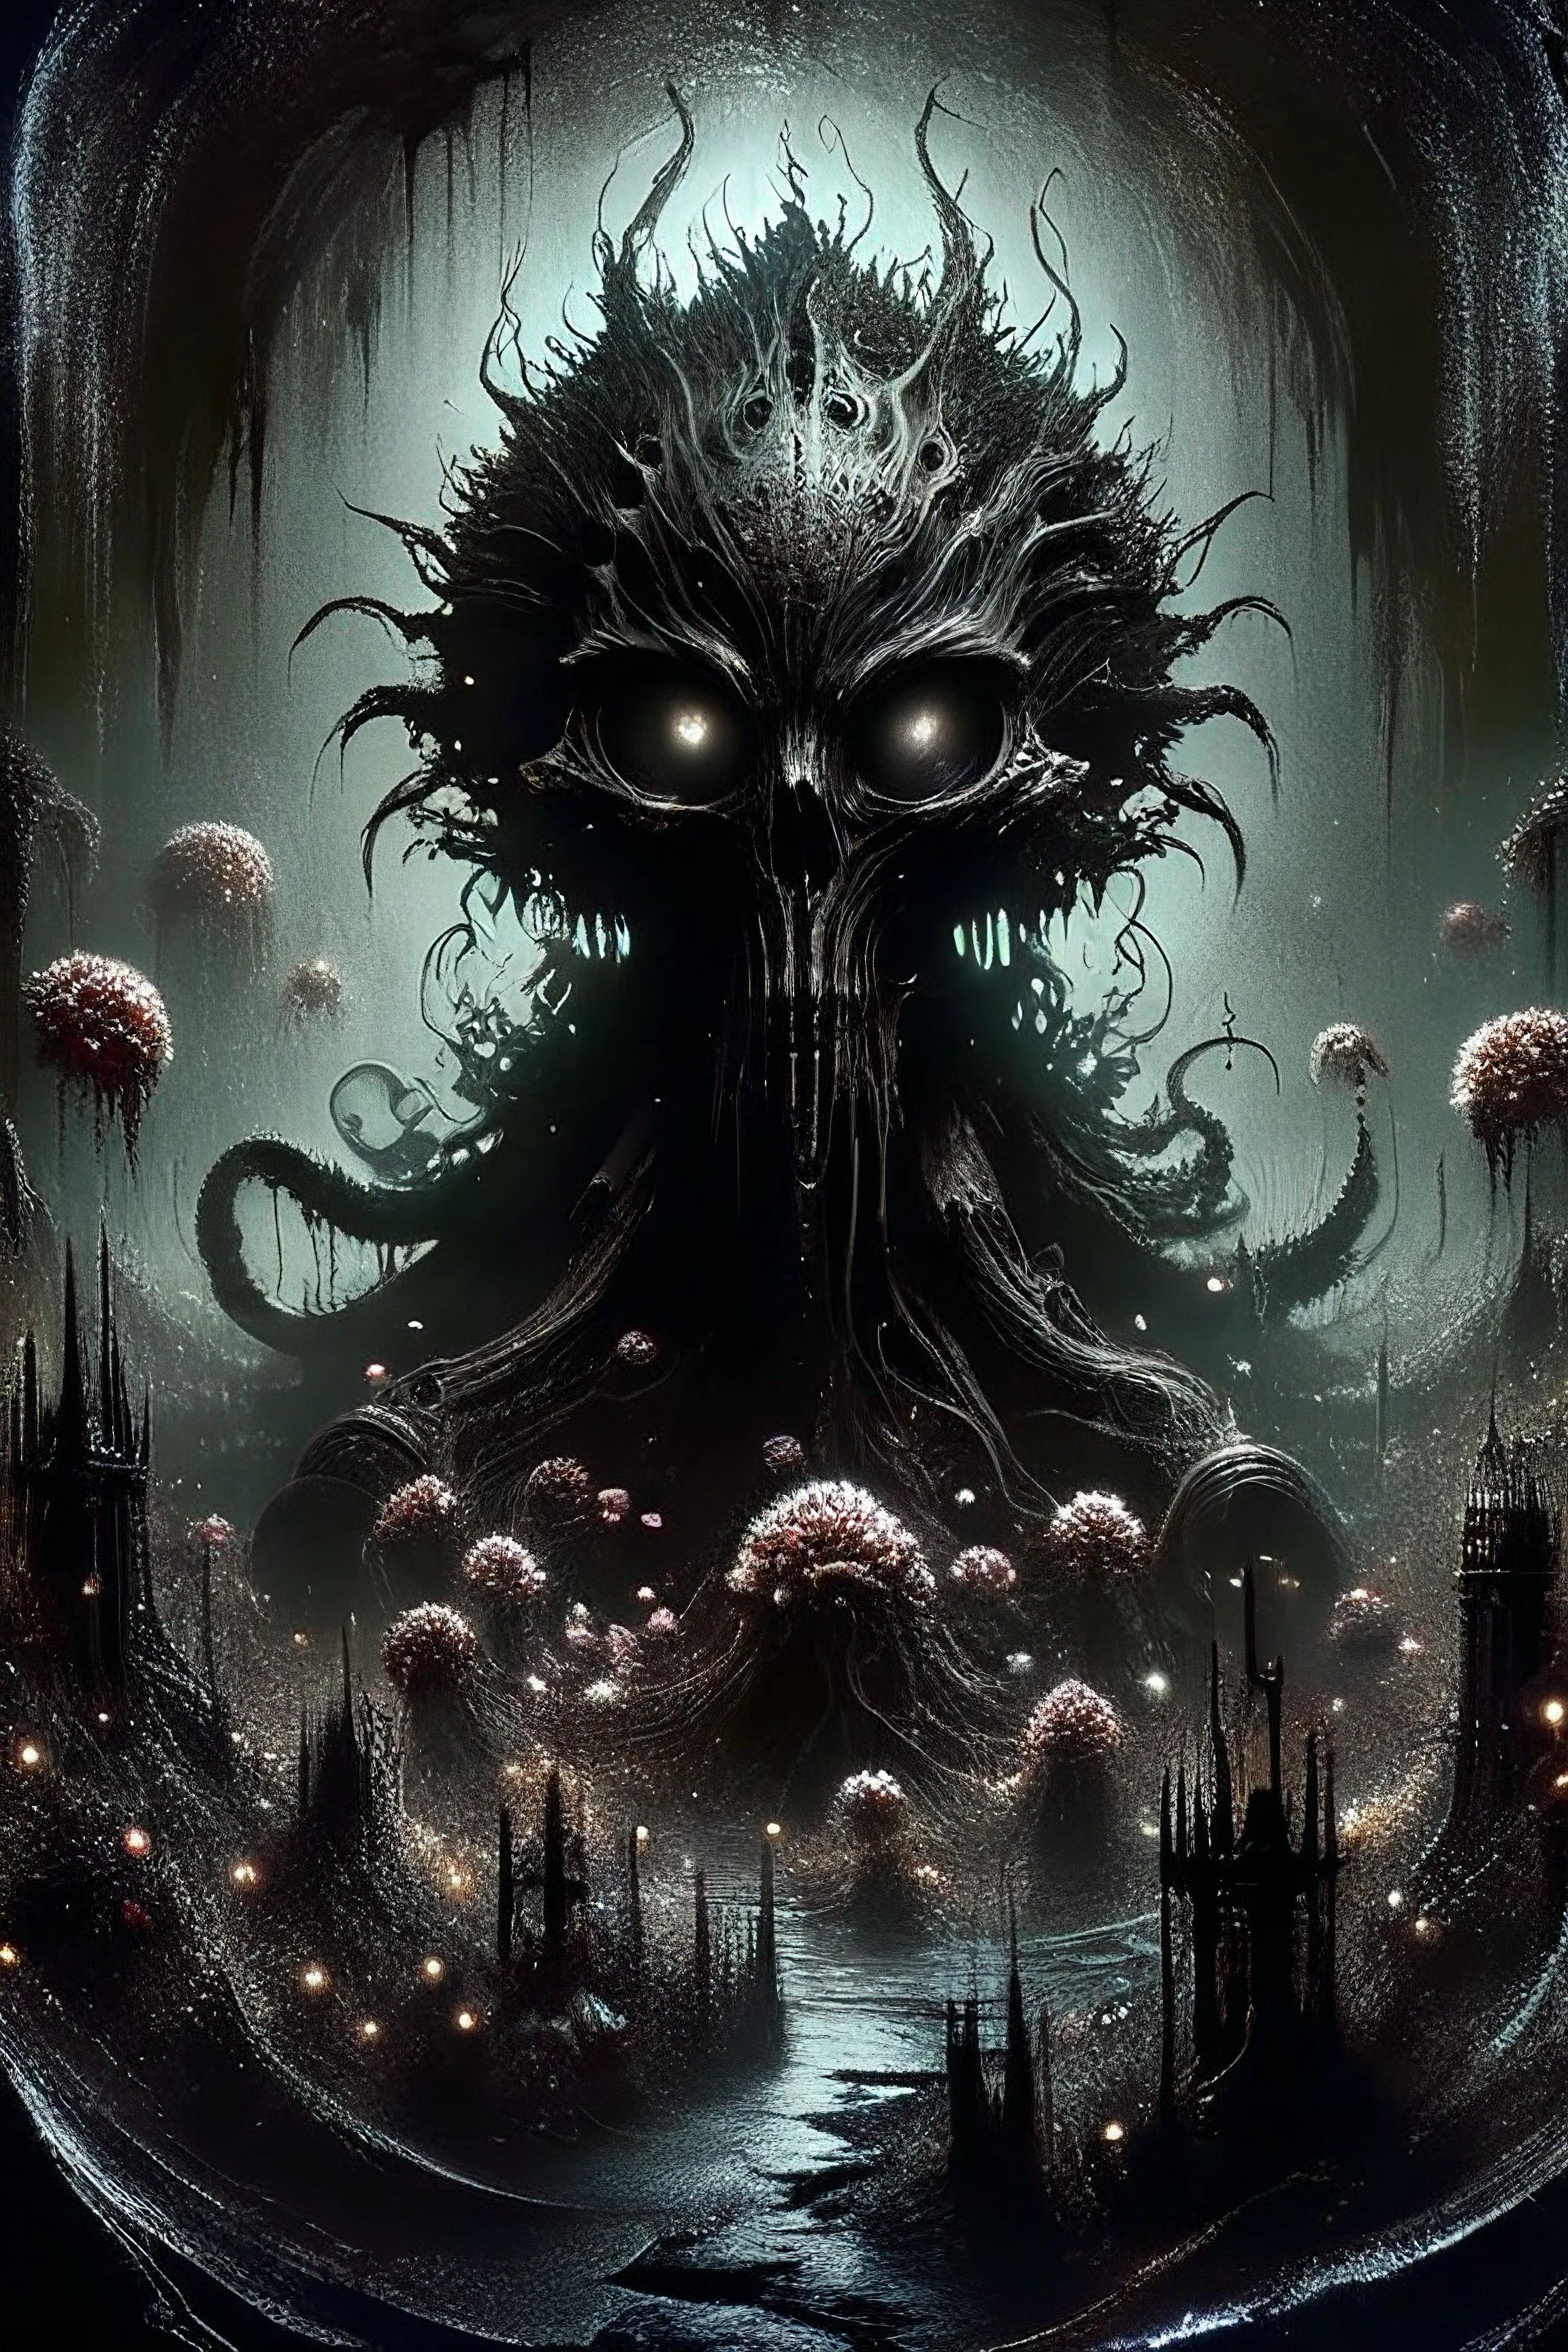 Alien-themed biomechanical style horror-themed (((epic-Ultra-HD-details, epic-Ultra-HD-highlights, epic-photo-same-realistic, upscaled-resolution, optimal)))A bio-mechanical forest taking over a desolate and abandoned dystopian cityscape,crumbling buildings,ruined skyscrapers,destroyed vehicles,remains,tendrils spreading everywhere,mechanical plants and flowers,mechanicals parts,bio-mechanical parts,living metal.,DonM3v1lM4dn355XL,Dark Fantasy page,ais-darkpartz,, eerie, unsettling, dark, spooky, suspenseful, grim, highly detailed,(((text))),((color)),(shading),background,noise,dithering,gradient,detailed,out of frame,ugly,error,Illustration, watermark,(((gothic ink on paper))),H.P. Lovecraft,Arthur Rackham, blend of organic and mechanical elements, futuristic, cybernetic, detailed, intricate . Extraterrestrial, cosmic, otherworldly, mysterious, sci-fi, highly detailed